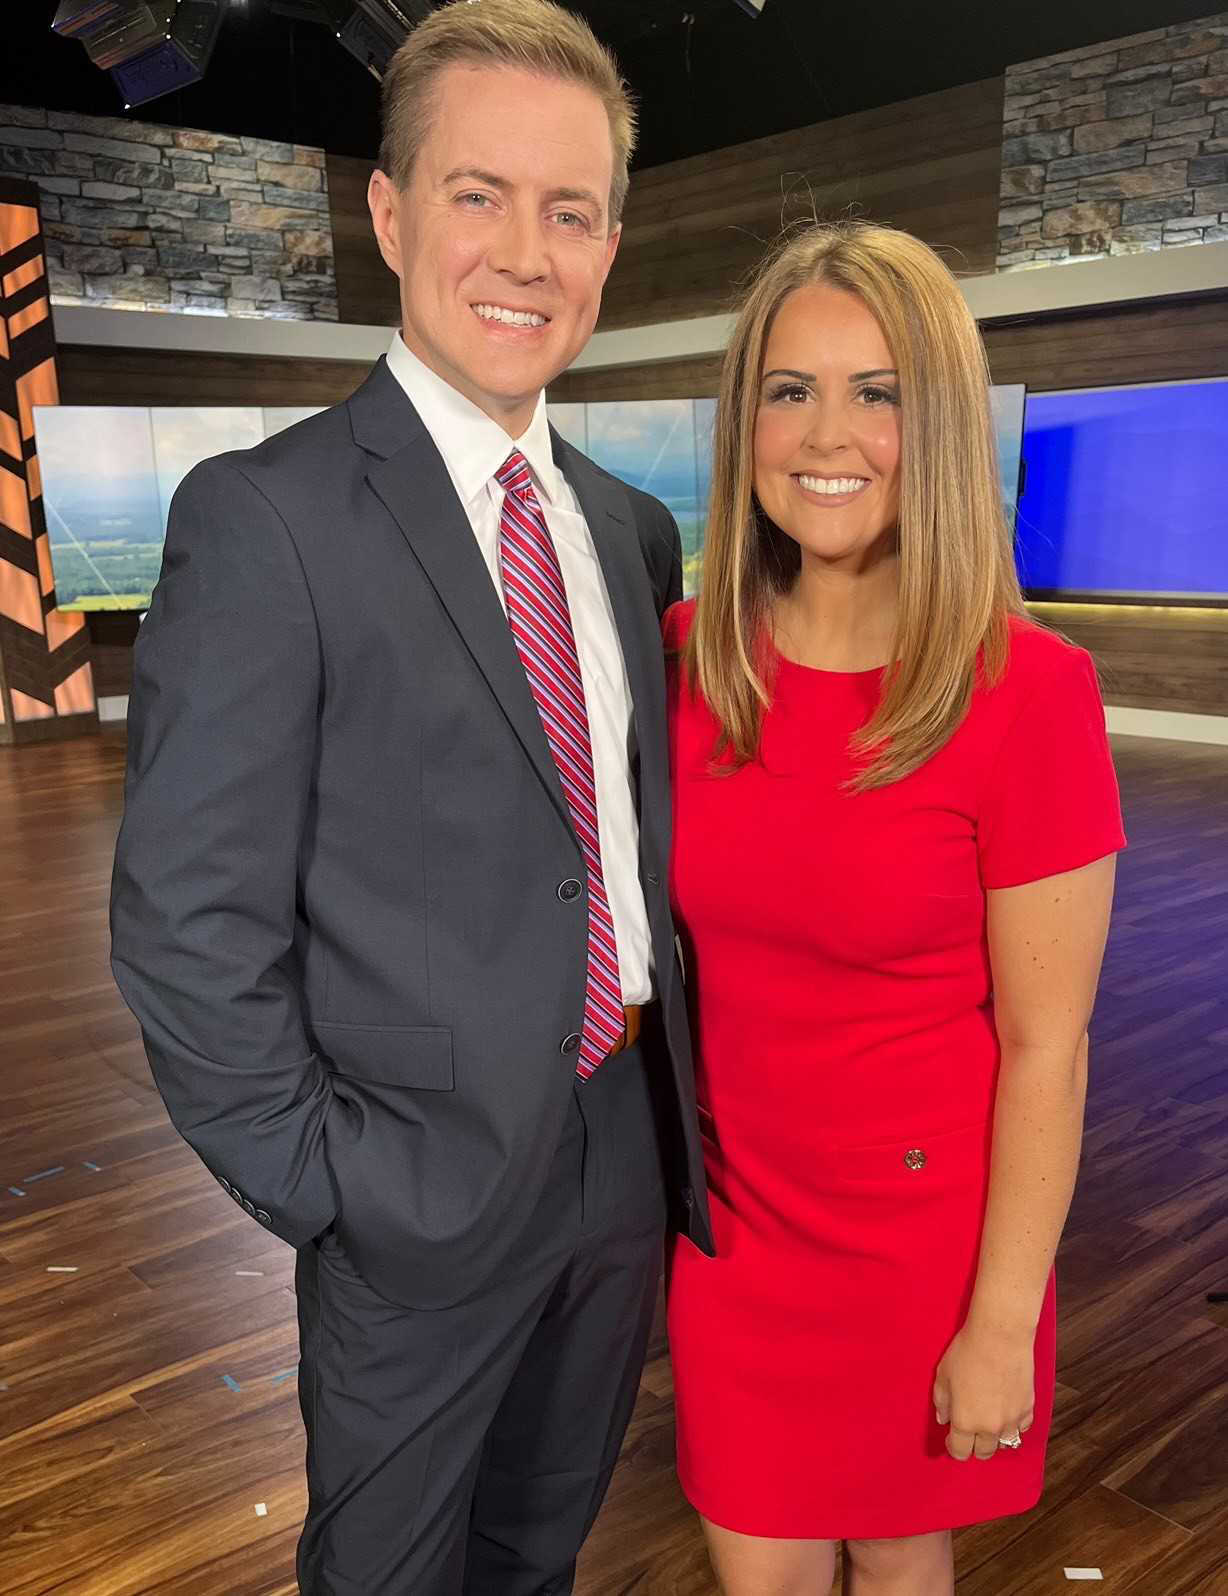 NBC5 to launch 4 p.m. newscast, Jack Thurston and Liz Strzepa to anchor